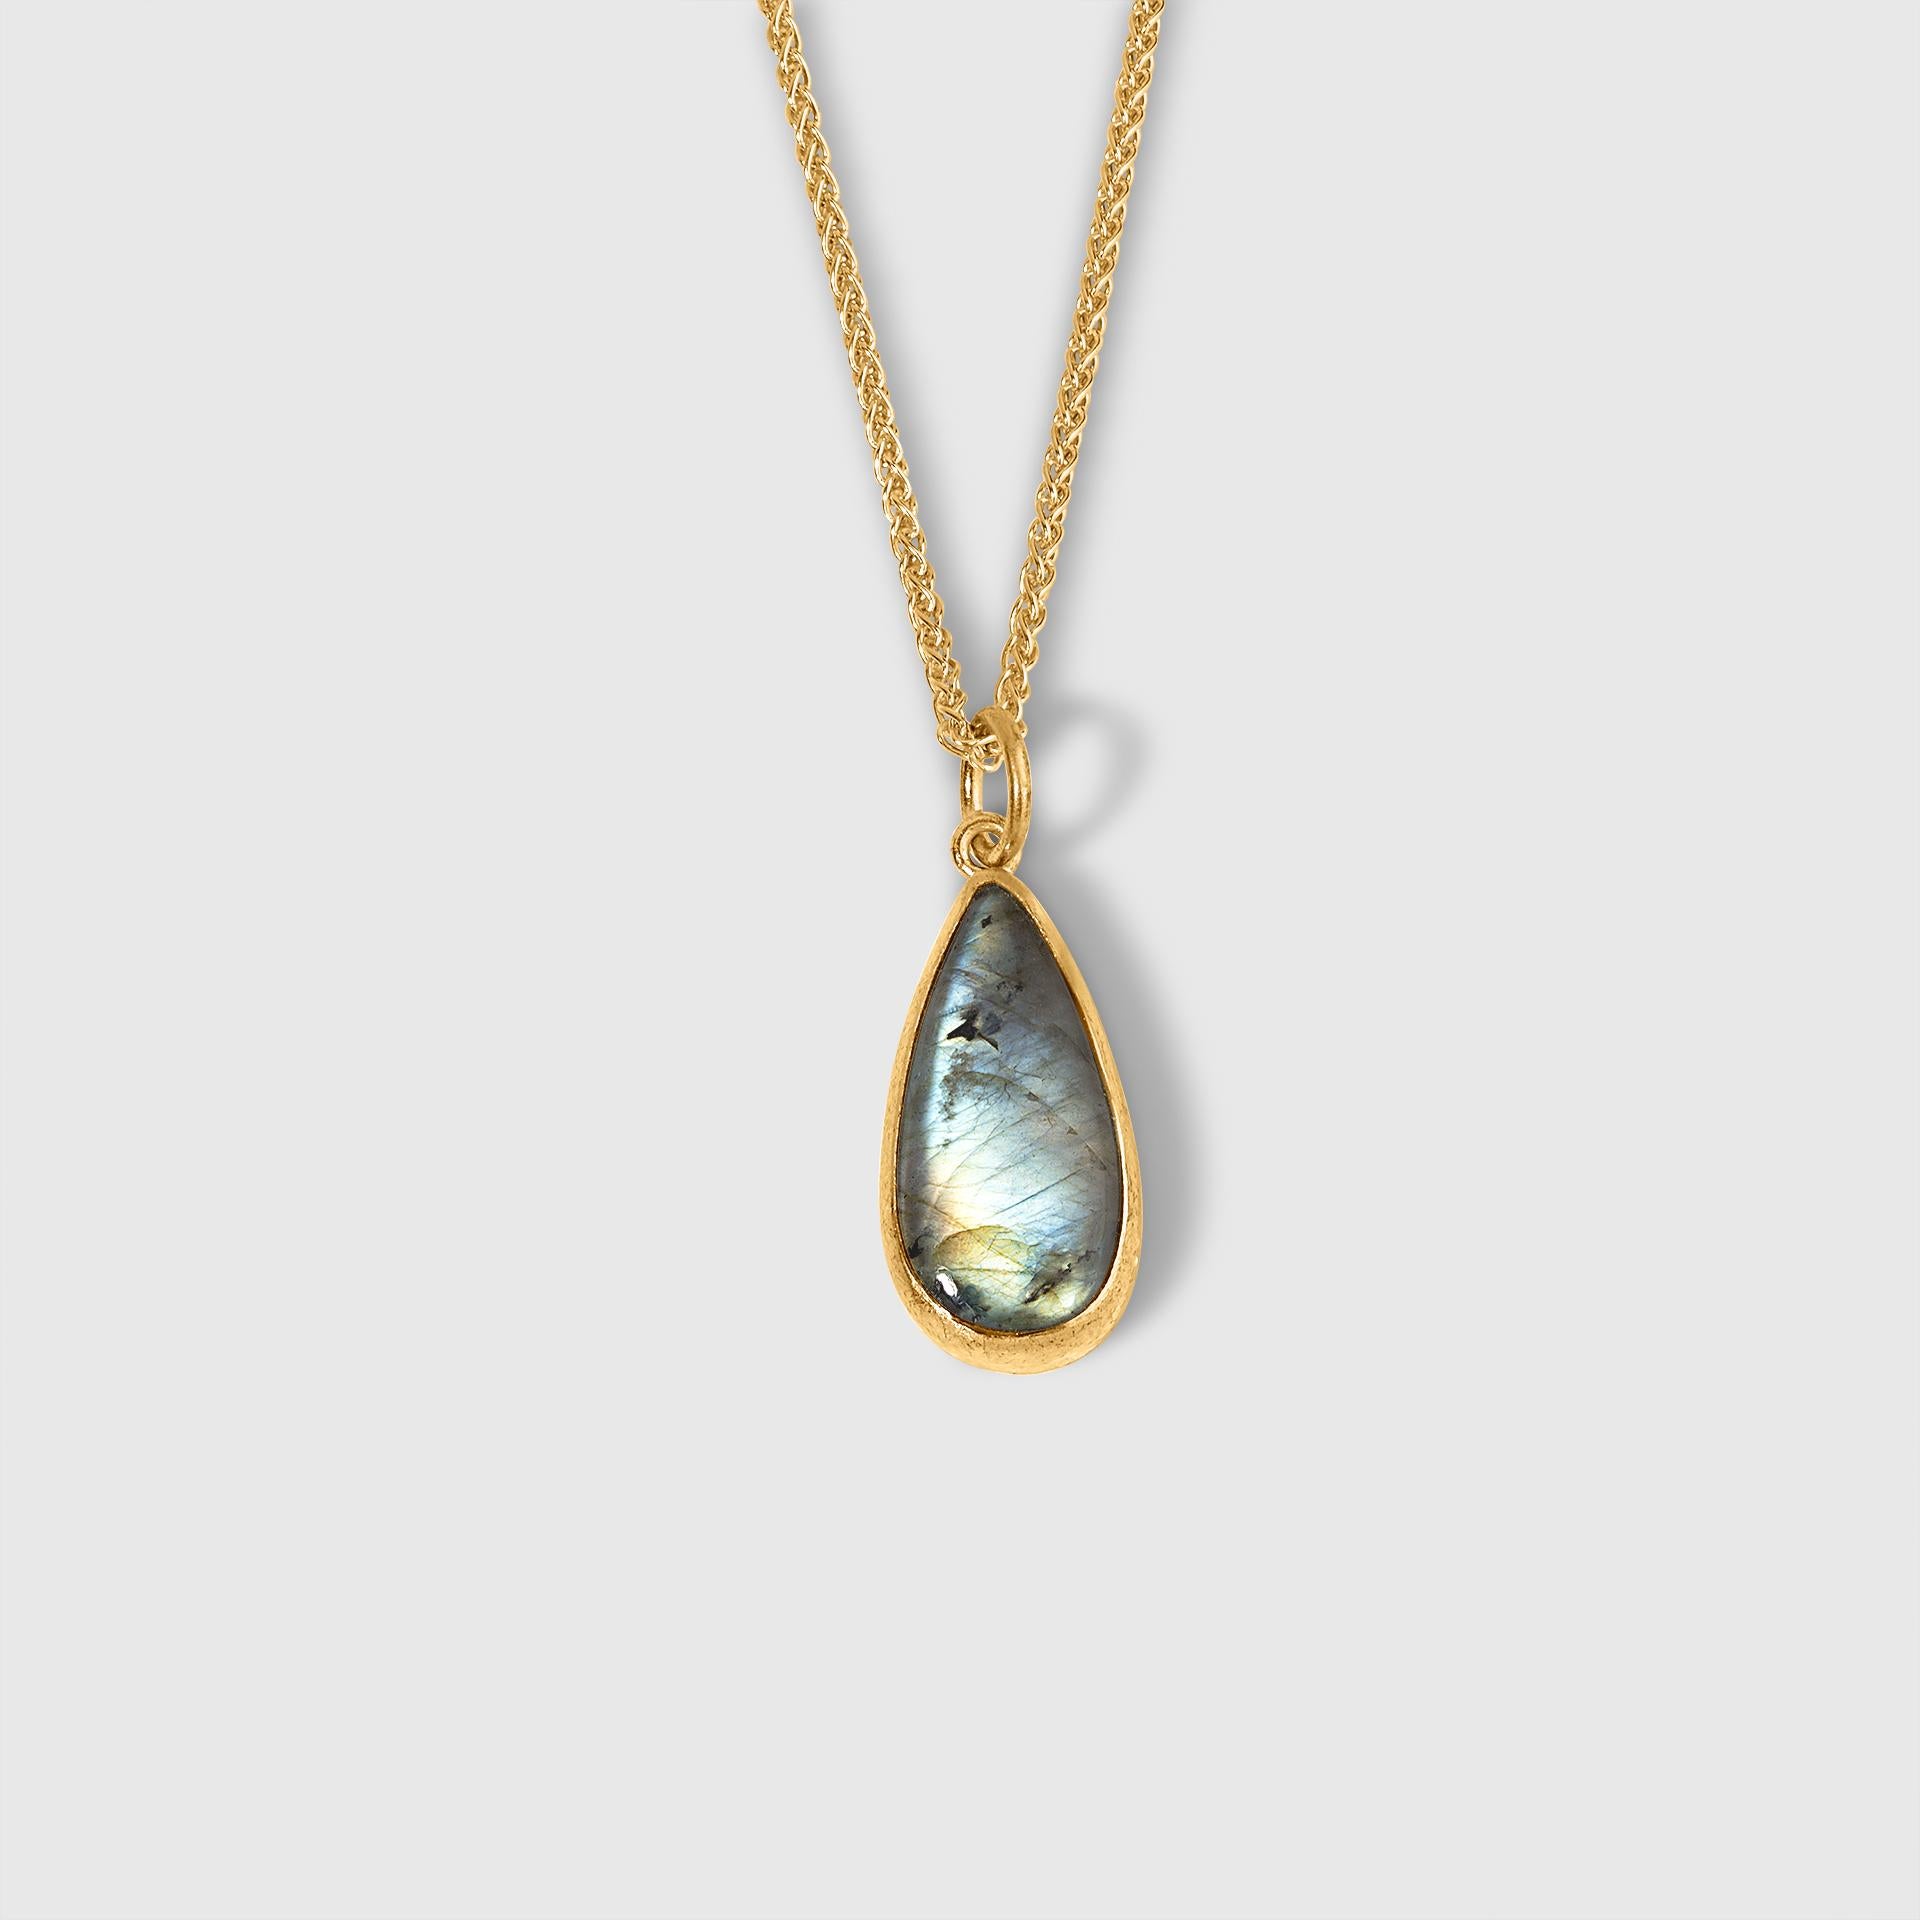 Tear-Drop Labradorite, 24K Gold Framed Pendant Necklace by Prehistoric Works of Istanbul, Turkey. These pendants look great alone or paired with other coin pendants or with miniature pendants. Measures:  11mm x 24mm (medium-sized pendant); chain